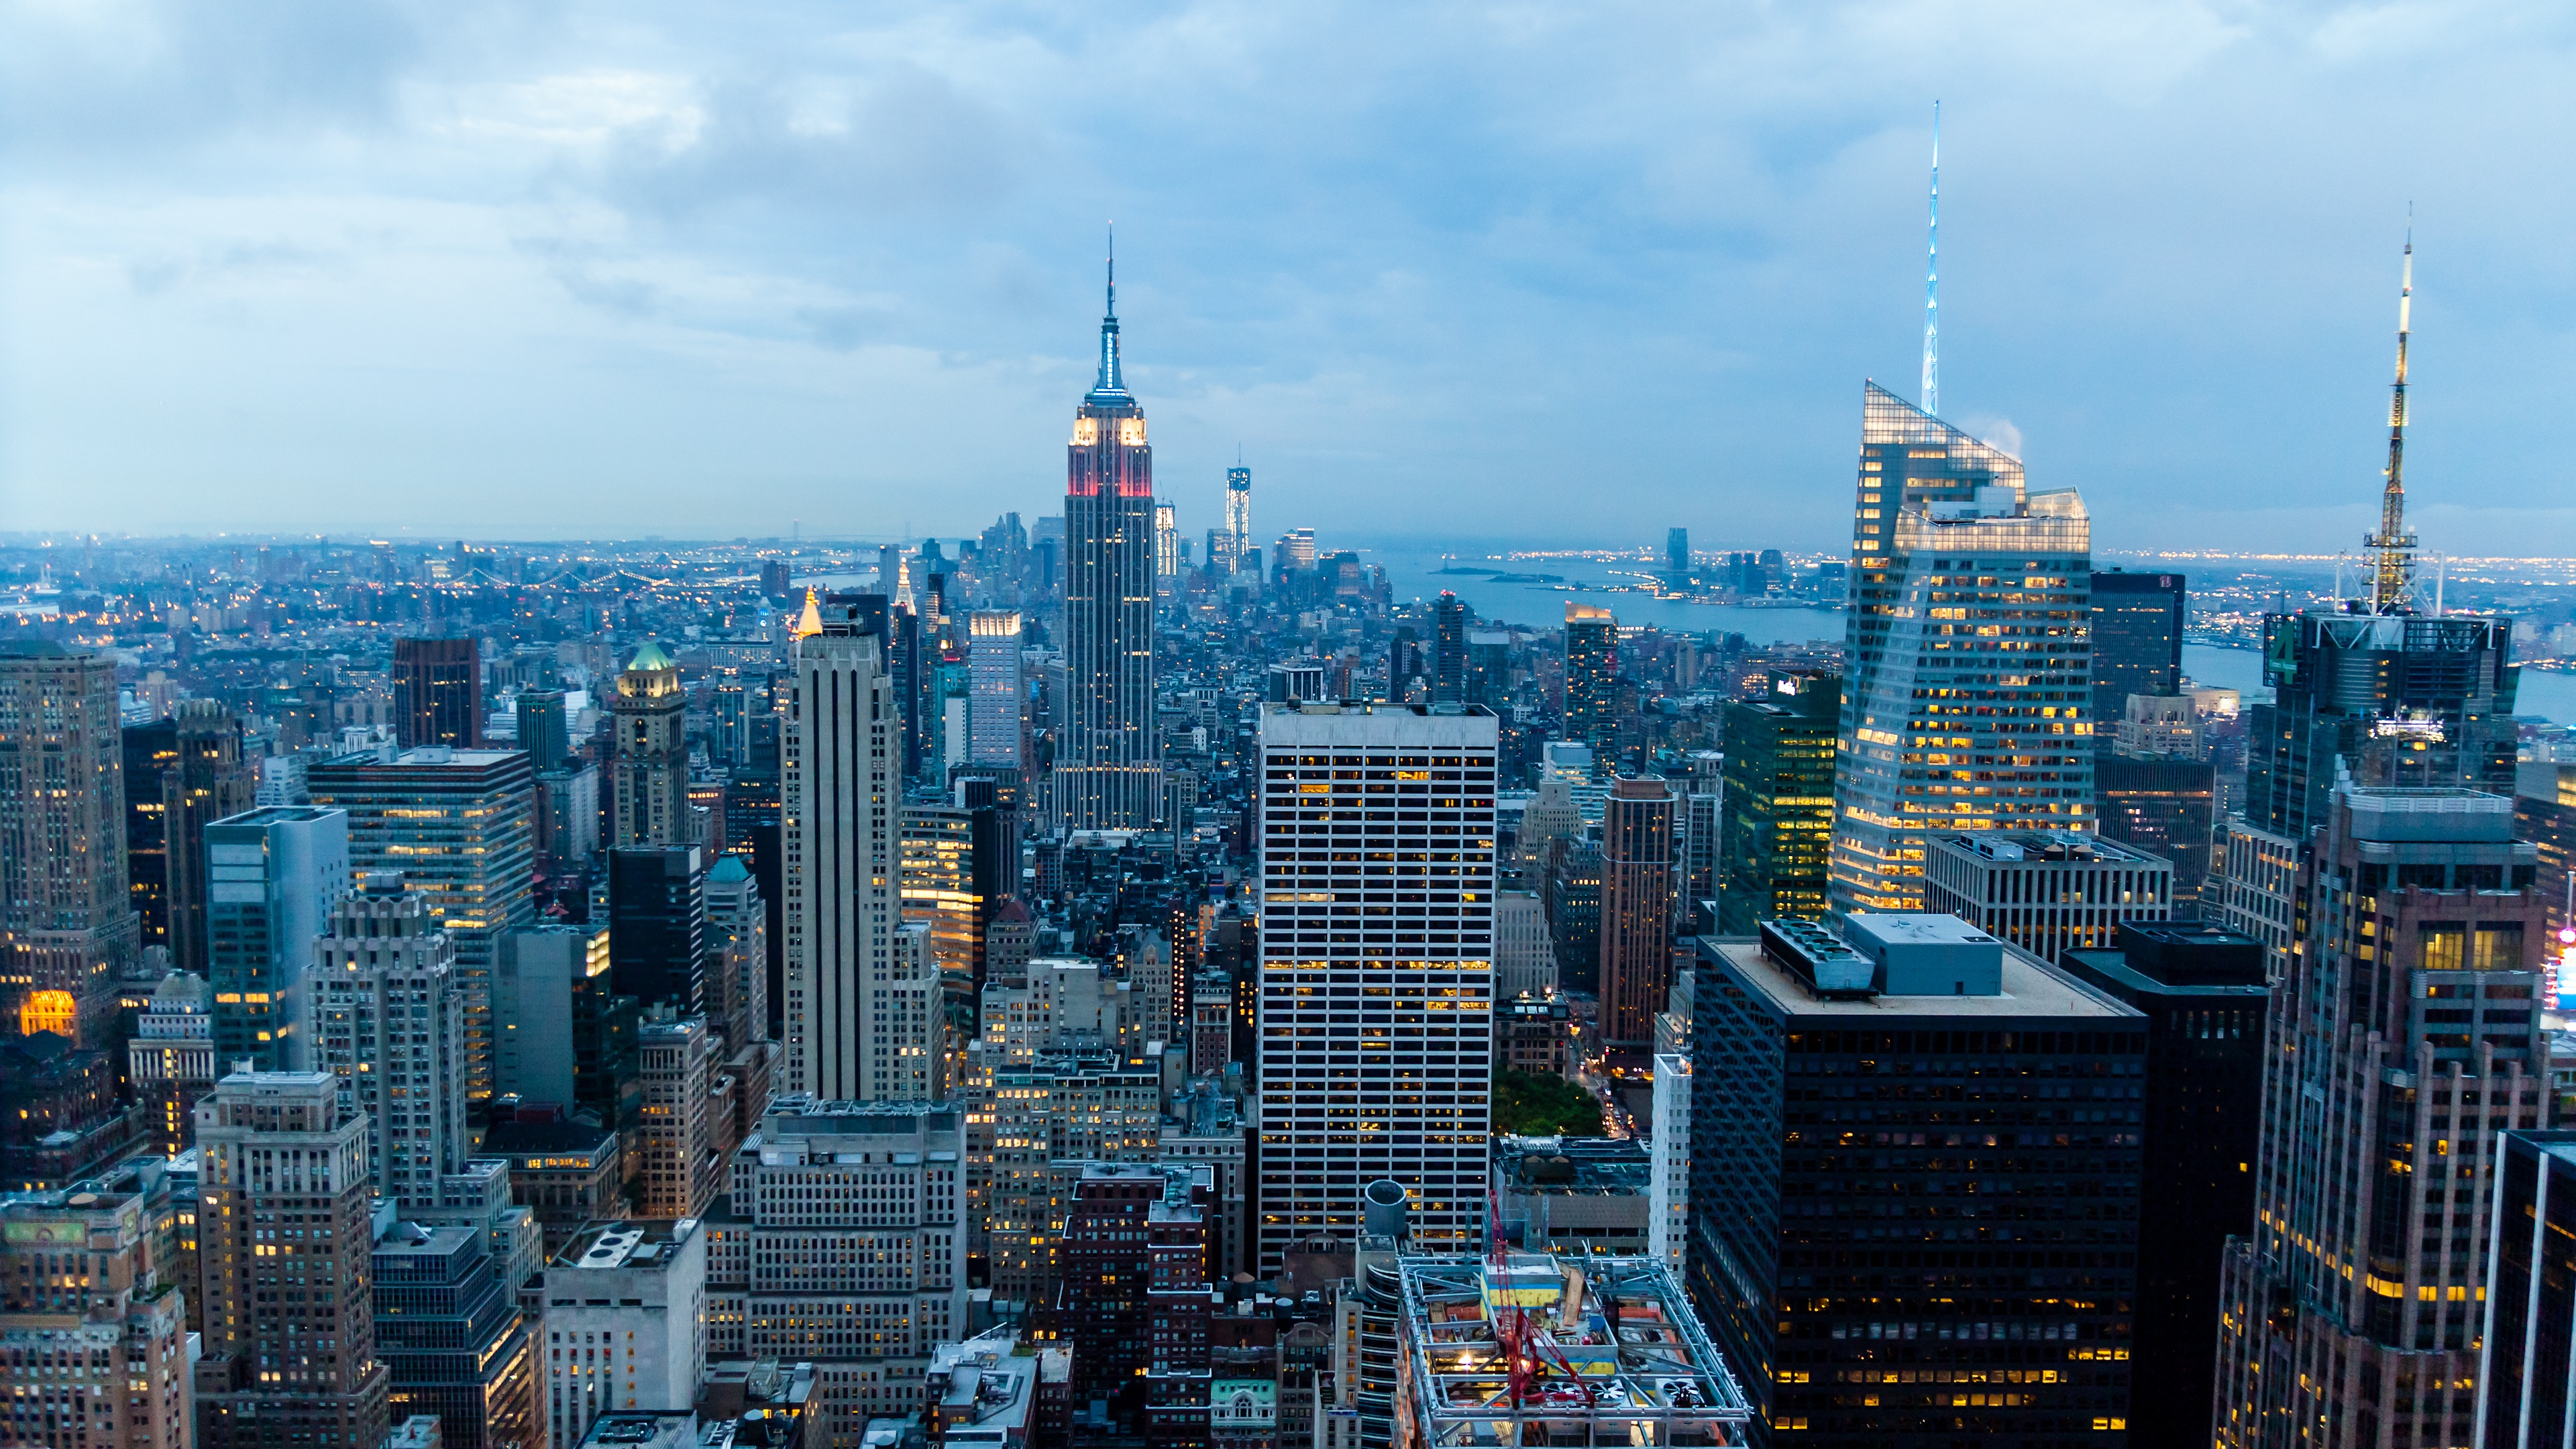 Cityscape lovers will enjoy these Desktop background new york images